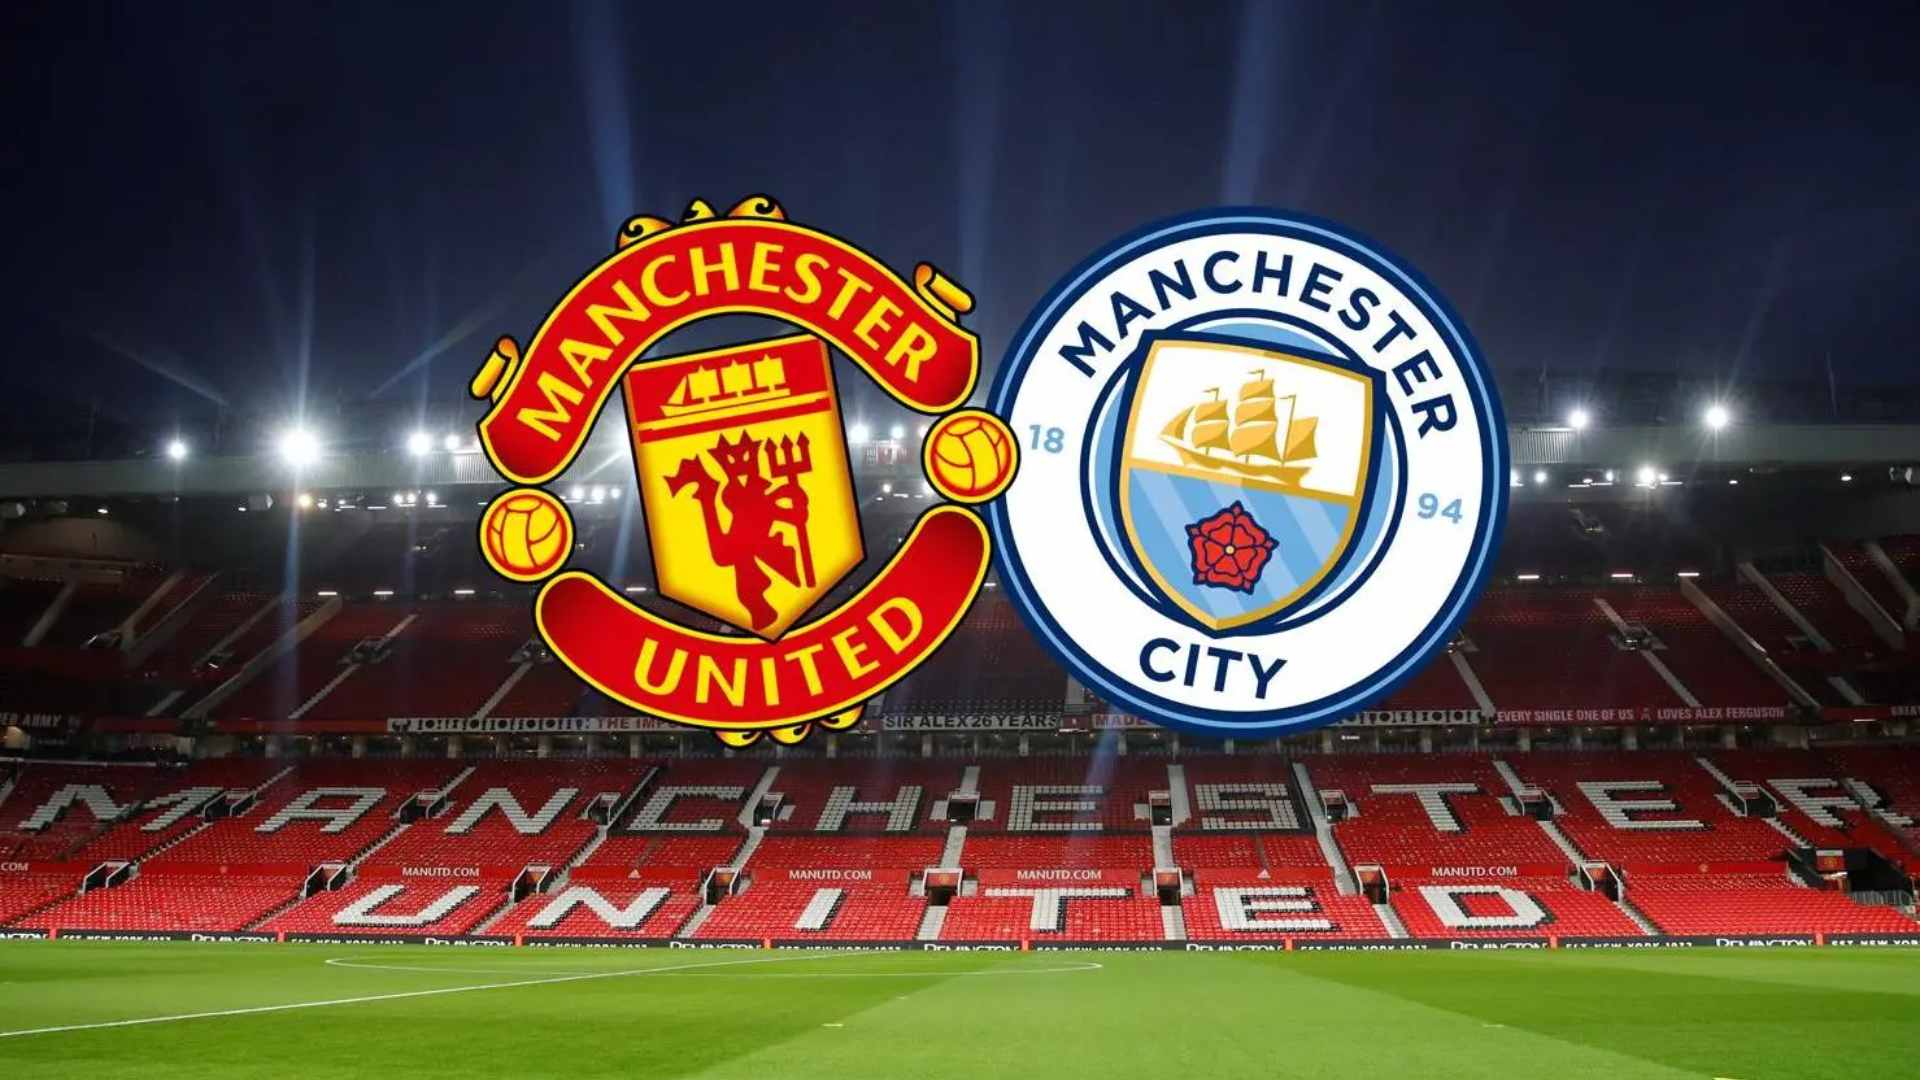 Manchester United y Manchester City